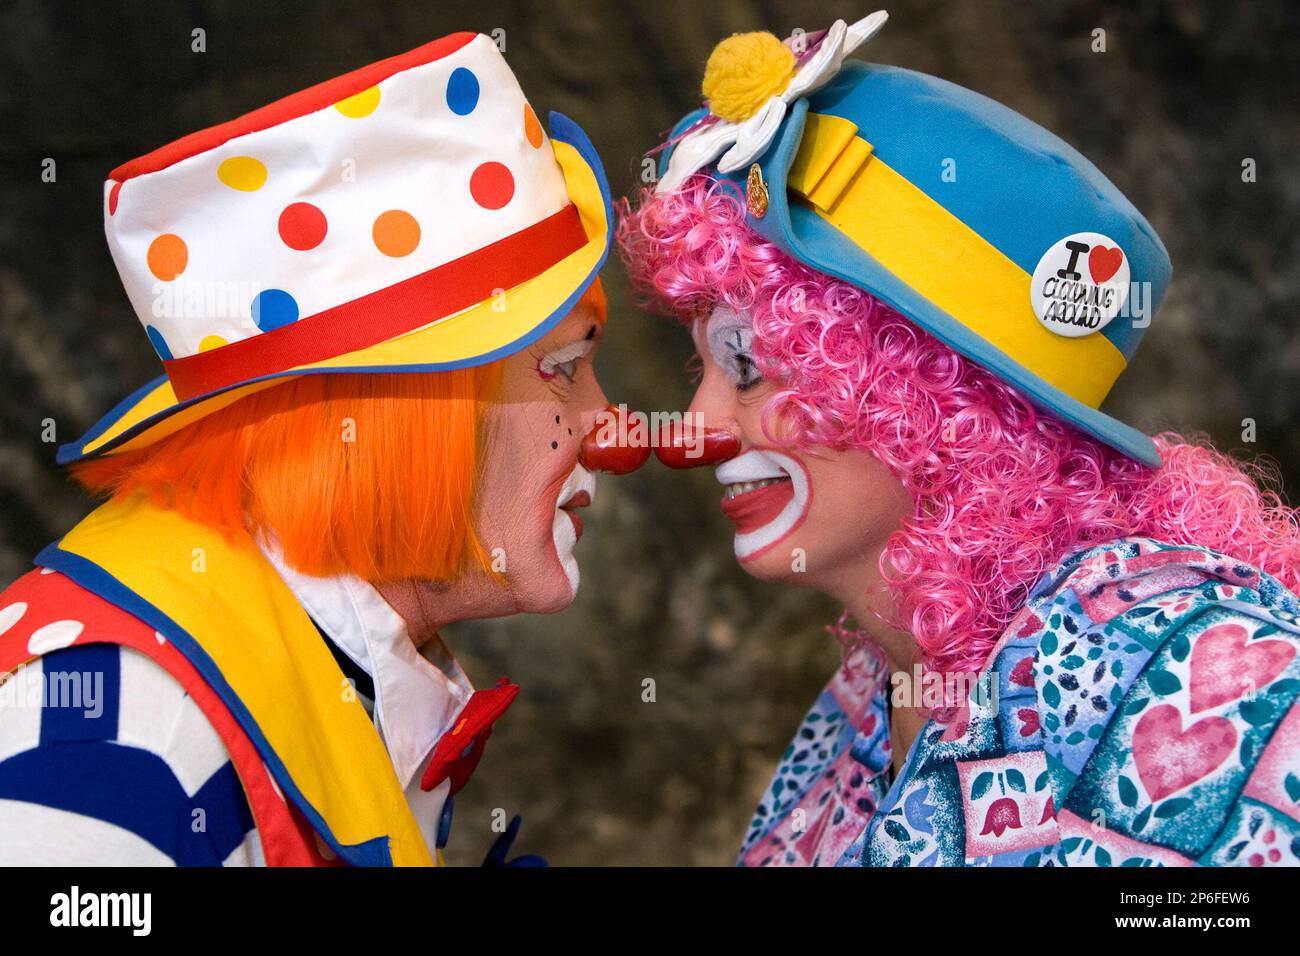 Jay J. the clown as known as James Caffrey, left, and LaDitzy the clown, also known as Debbie Fowler of Walcott, N.D. clown around at the Clowns of America International clown convention, Wednesday, April 25, 2012, in Kansas City. Mo. (AP Photo/The Kansas City Star, Tammy Ljungblad) Stock Photo